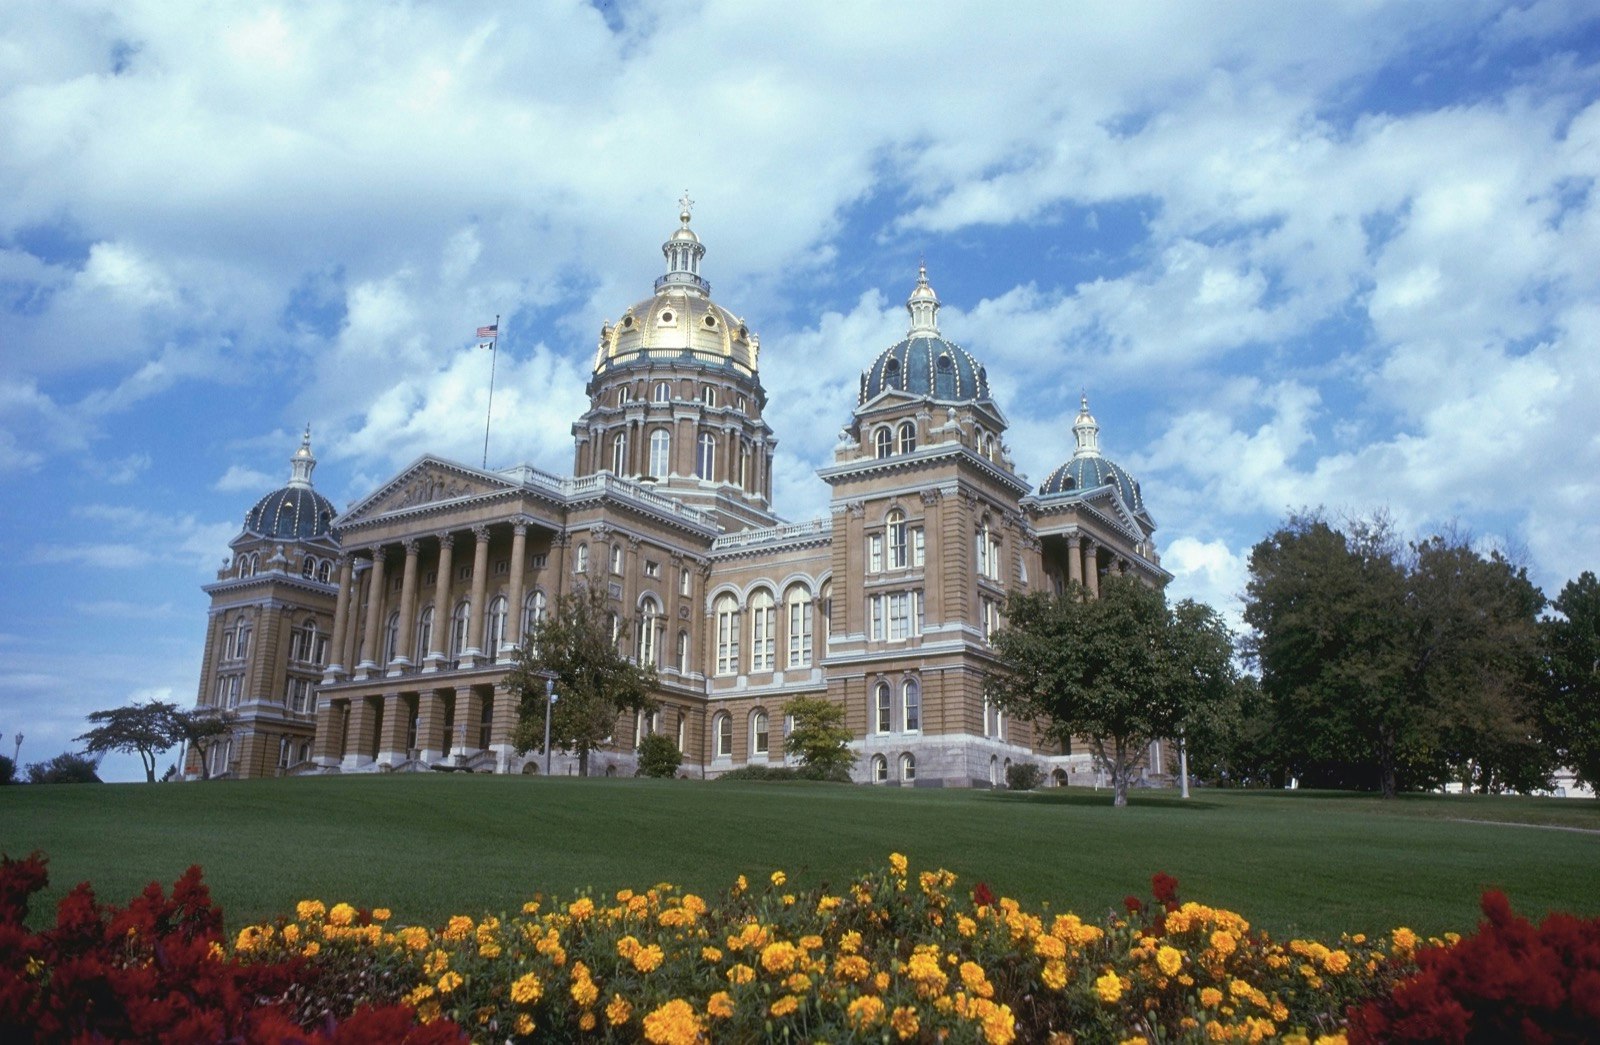 Flowers dominate the foreground in a landscaped park as the Iowa state capitol stands on a hill behind; Things to do in Des Moines during the Iowa Caucuses